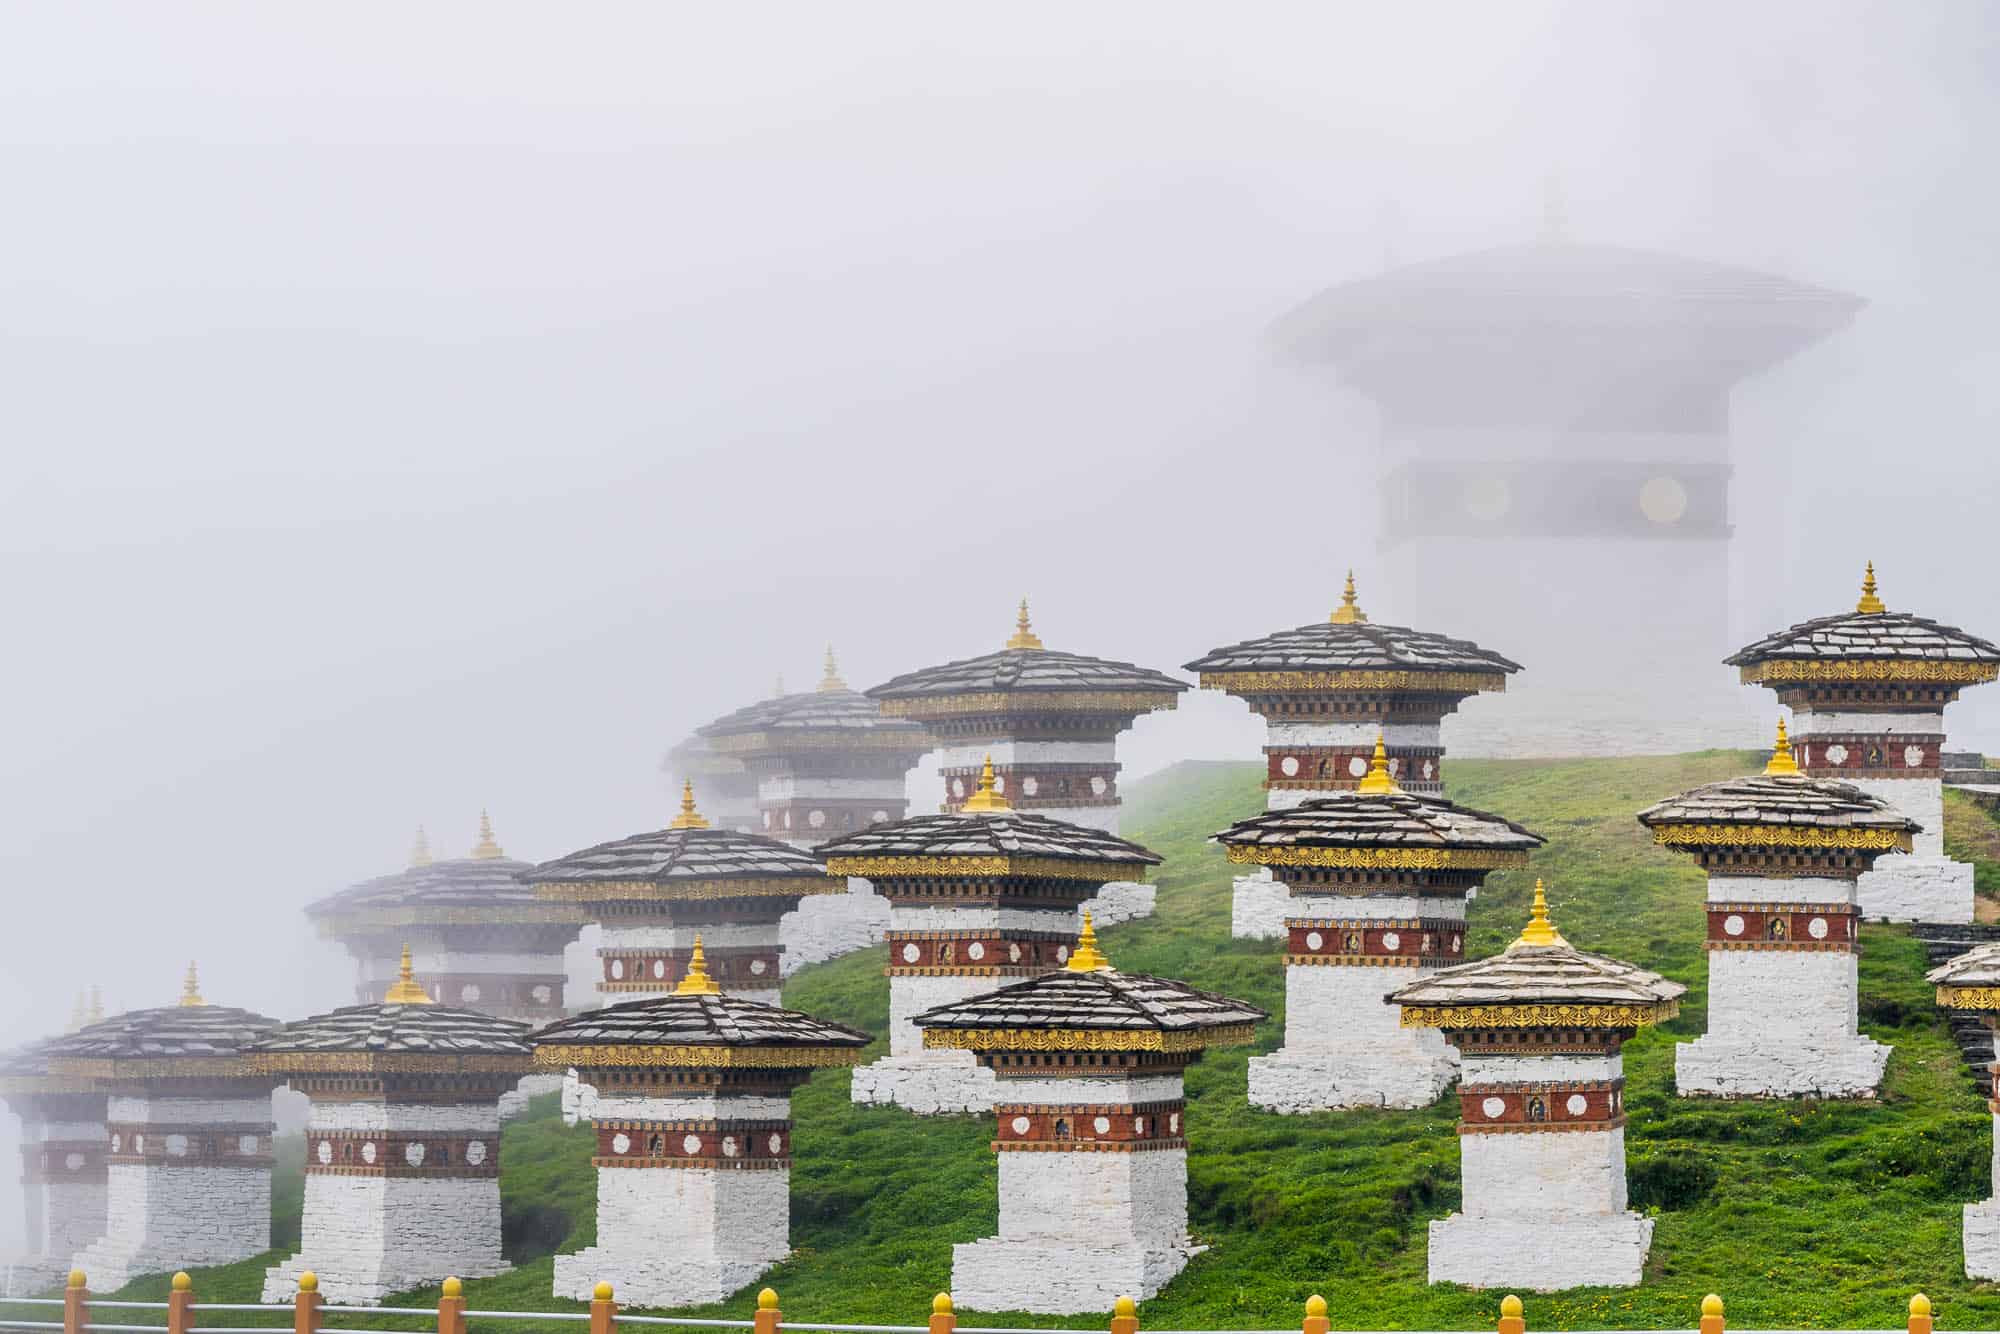 many structures aligned in front of a Bhutanese temple